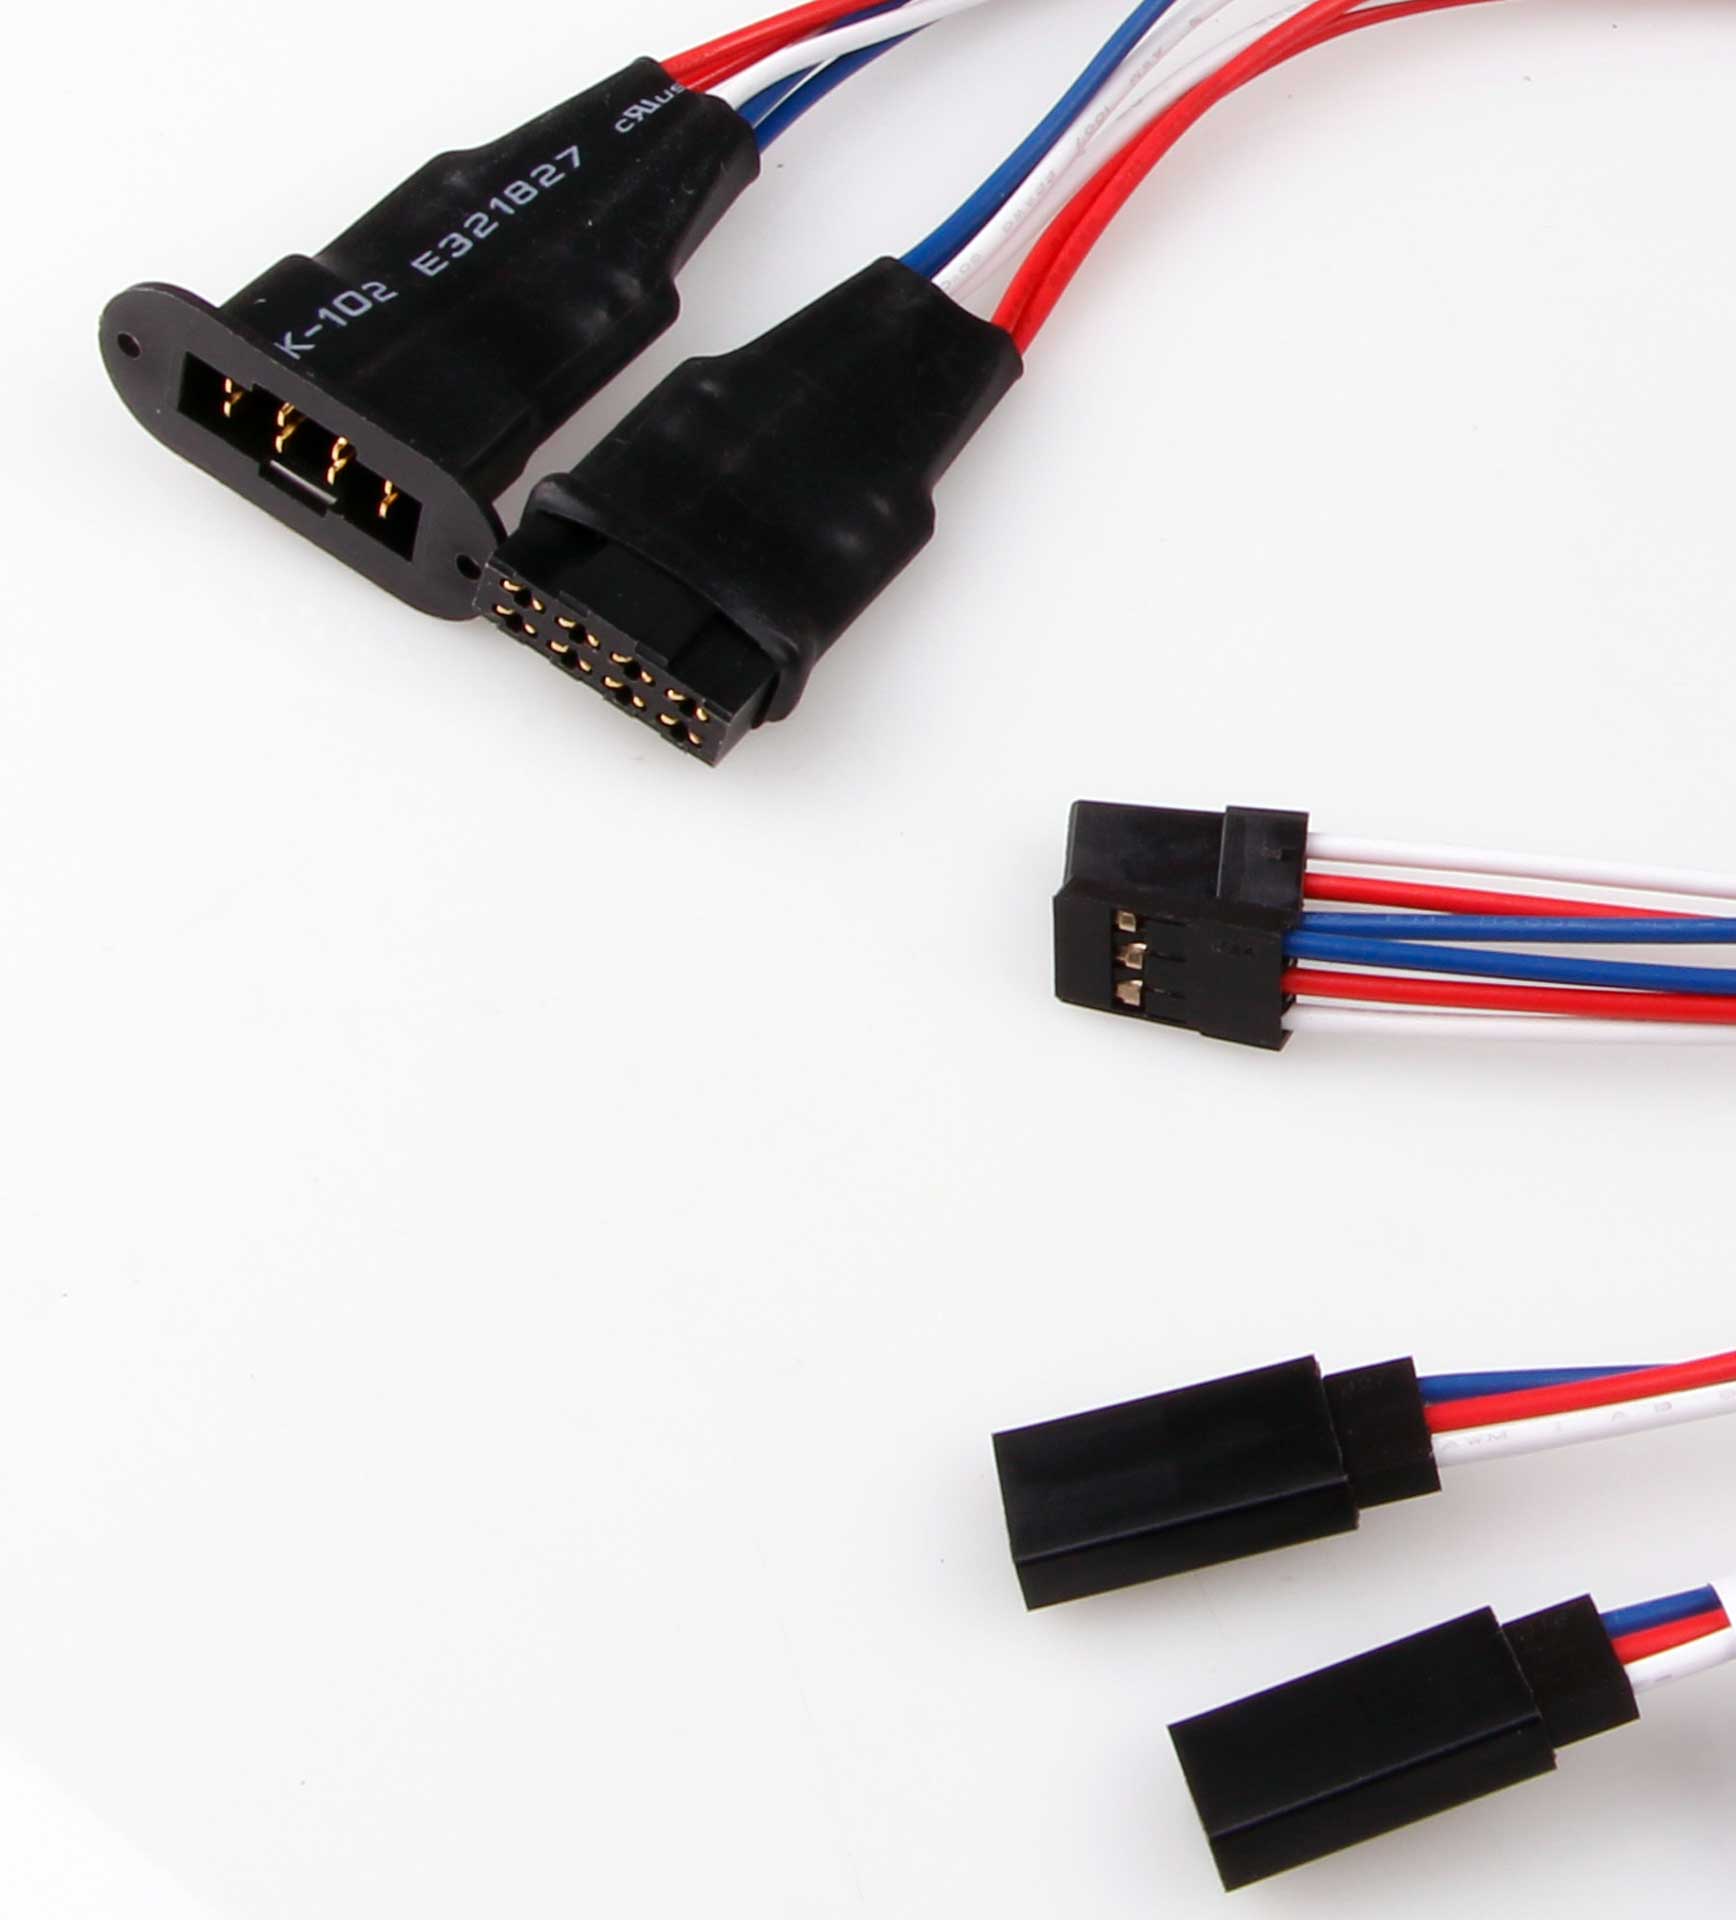 Robbe Modellsport cable set for 2 Servos MPX 8-pin "Hochstrom" connector system to Futaba 300mm 22AWG/0,32²mm 1 pair